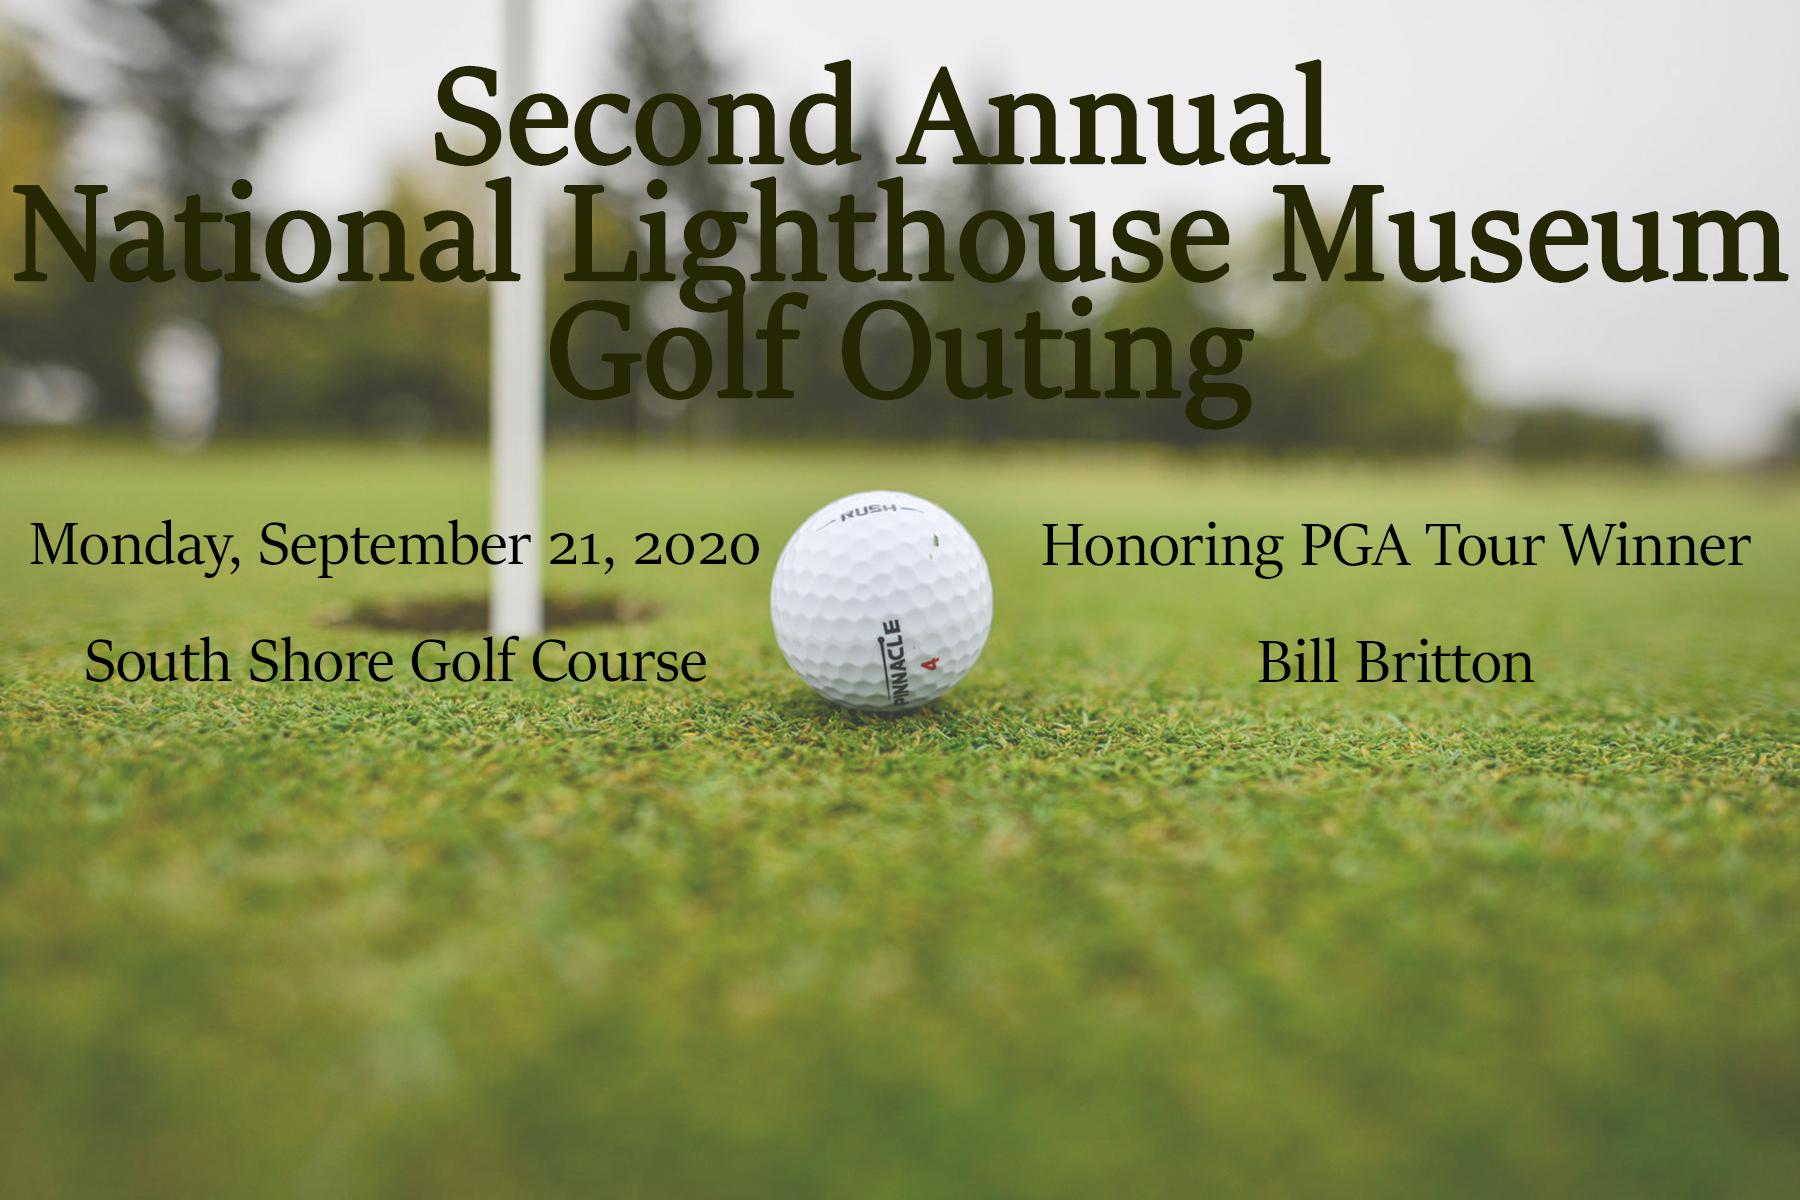 2nd Annual National Lighthouse Museum Golf Outing